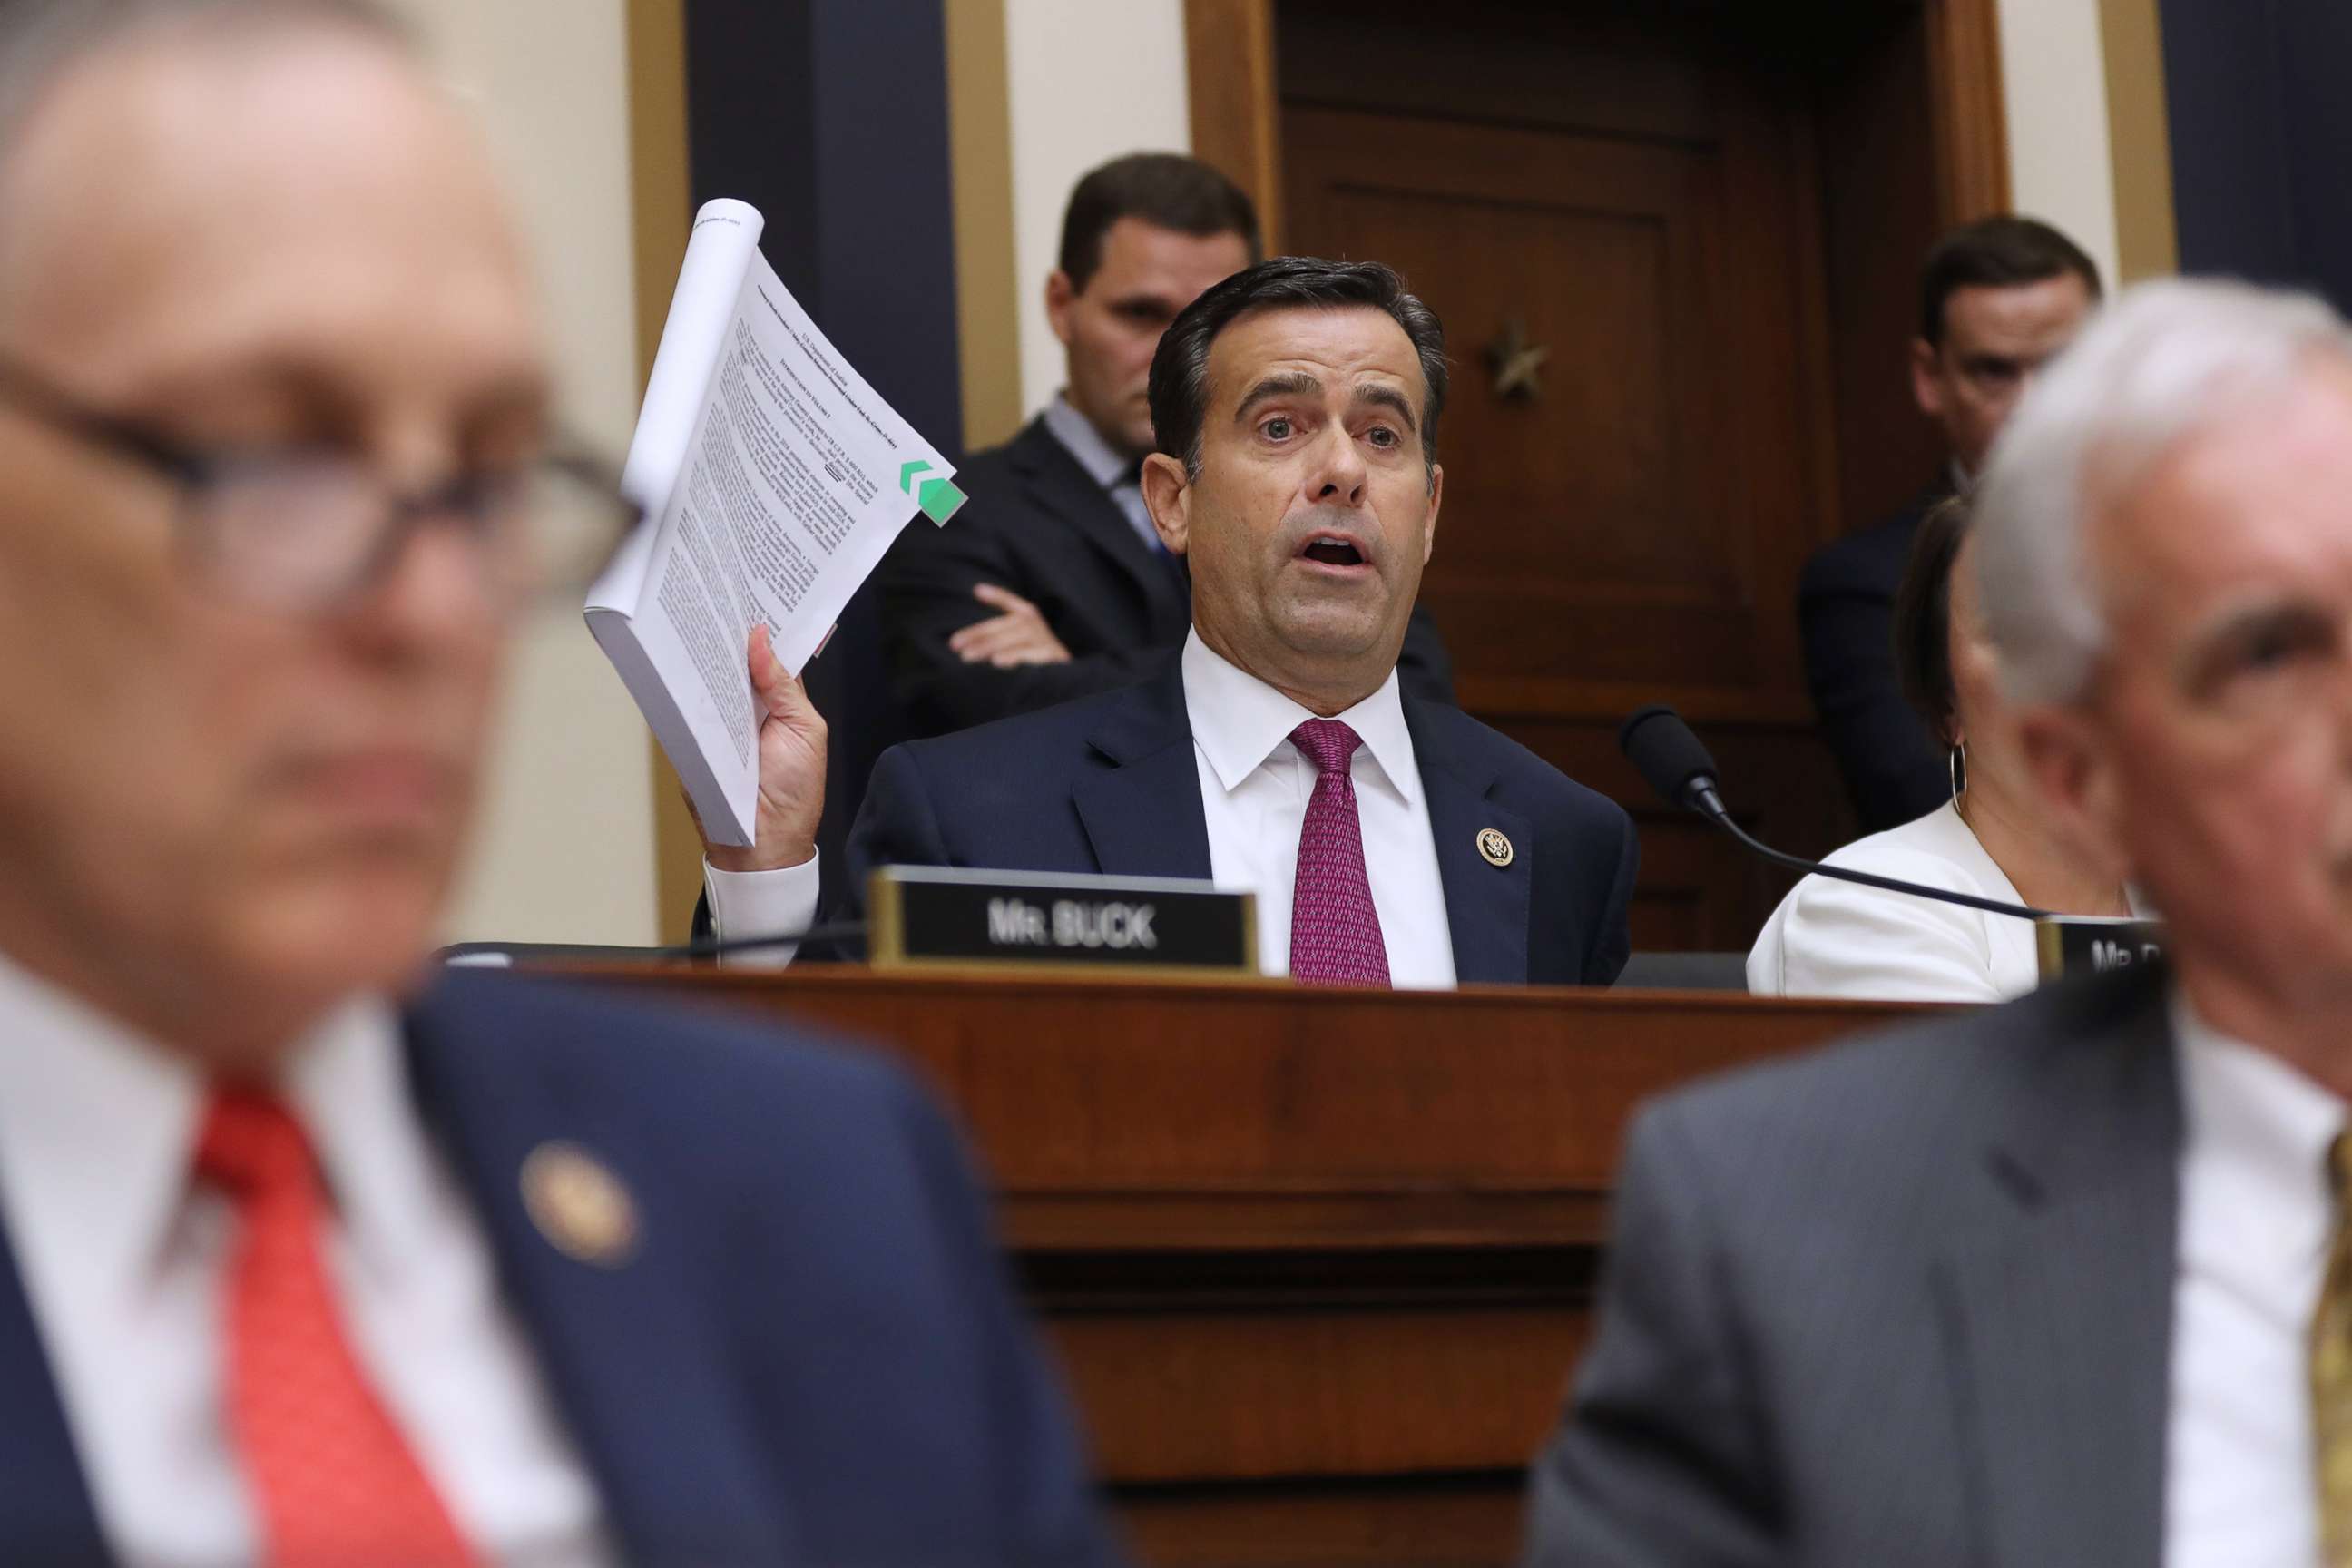 PHOTO: Rep. John Ratcliffe questions former Special Counsel Robert Mueller as he testifies before the House Judiciary Committee about his report on Russian interference in the 2016 presidential election, July 24, 2019, in Washington, D.C.